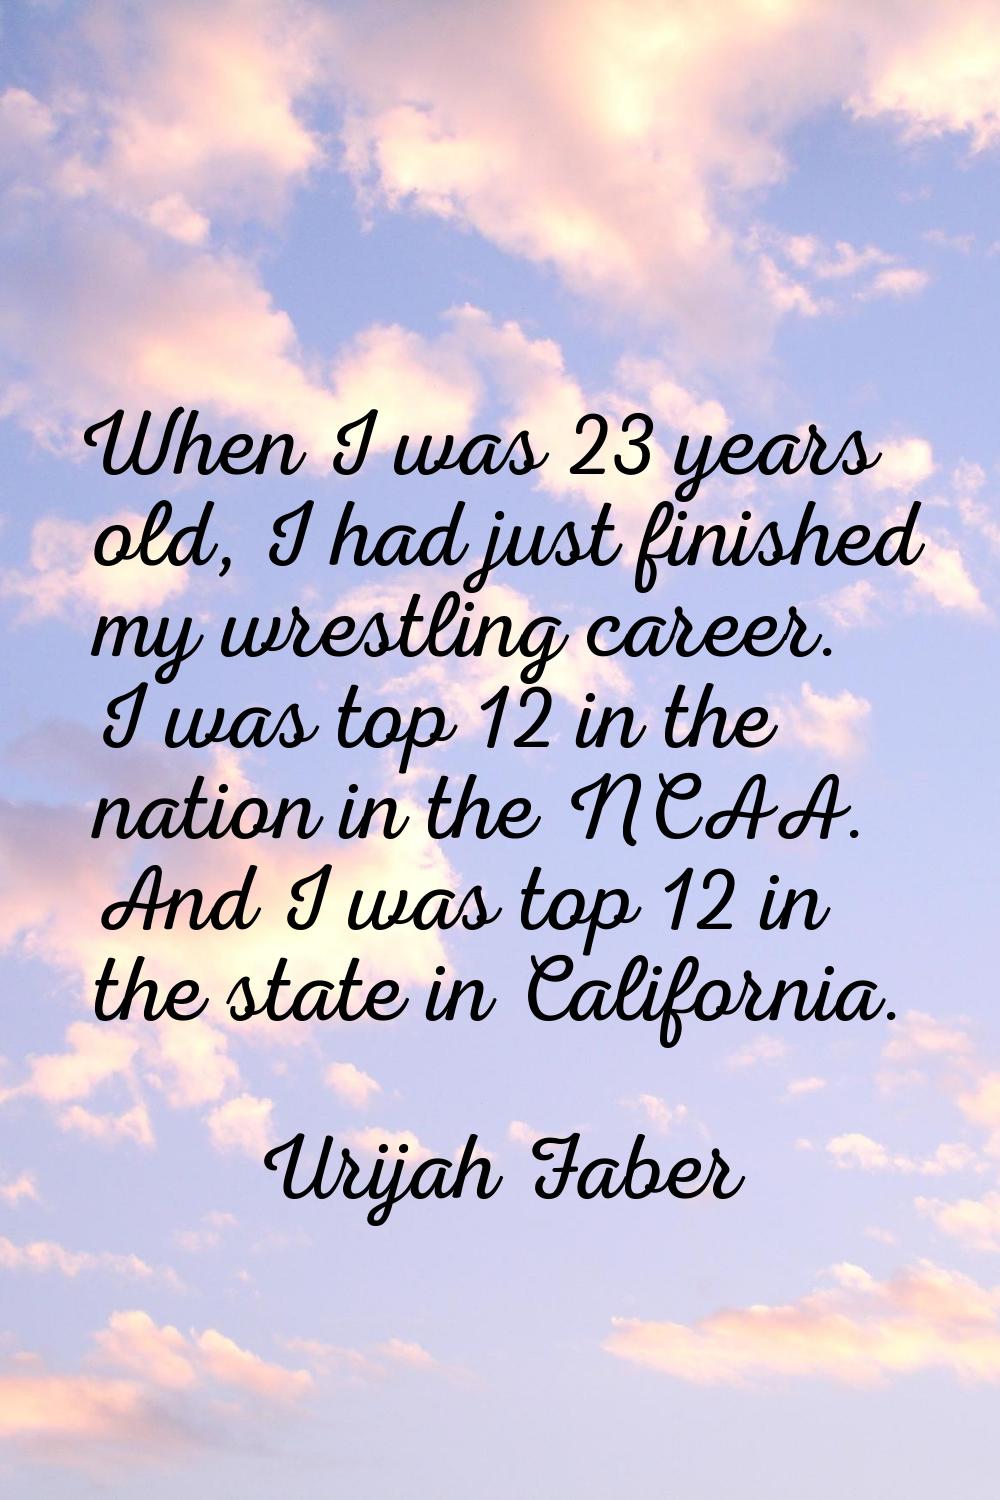 When I was 23 years old, I had just finished my wrestling career. I was top 12 in the nation in the